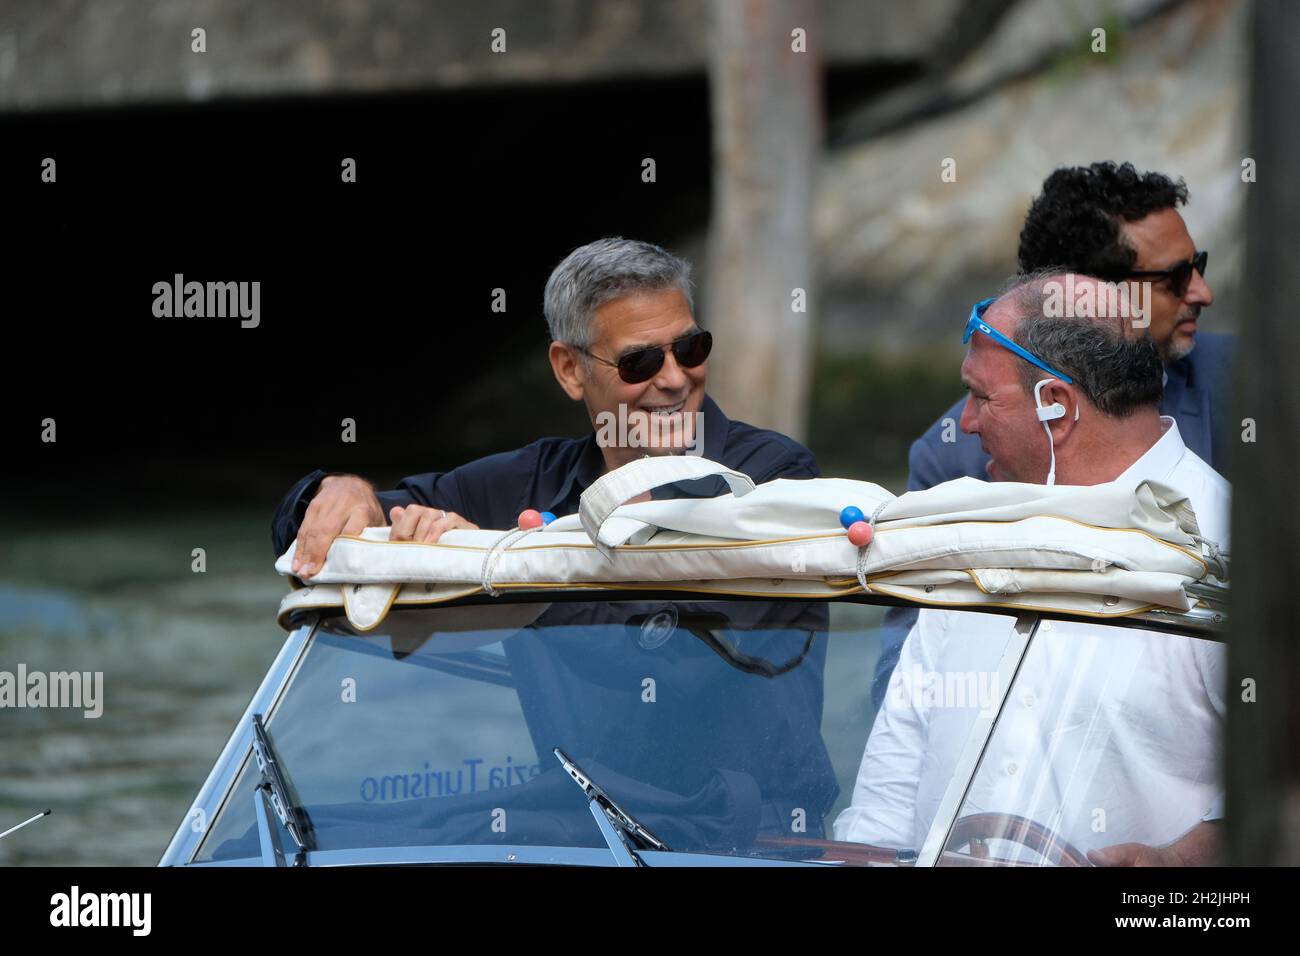 Actor George Clooney Arrive at the 74th Venice Film Festival in Venice, Italy August 30, 2017. (MvS) Stock Photo